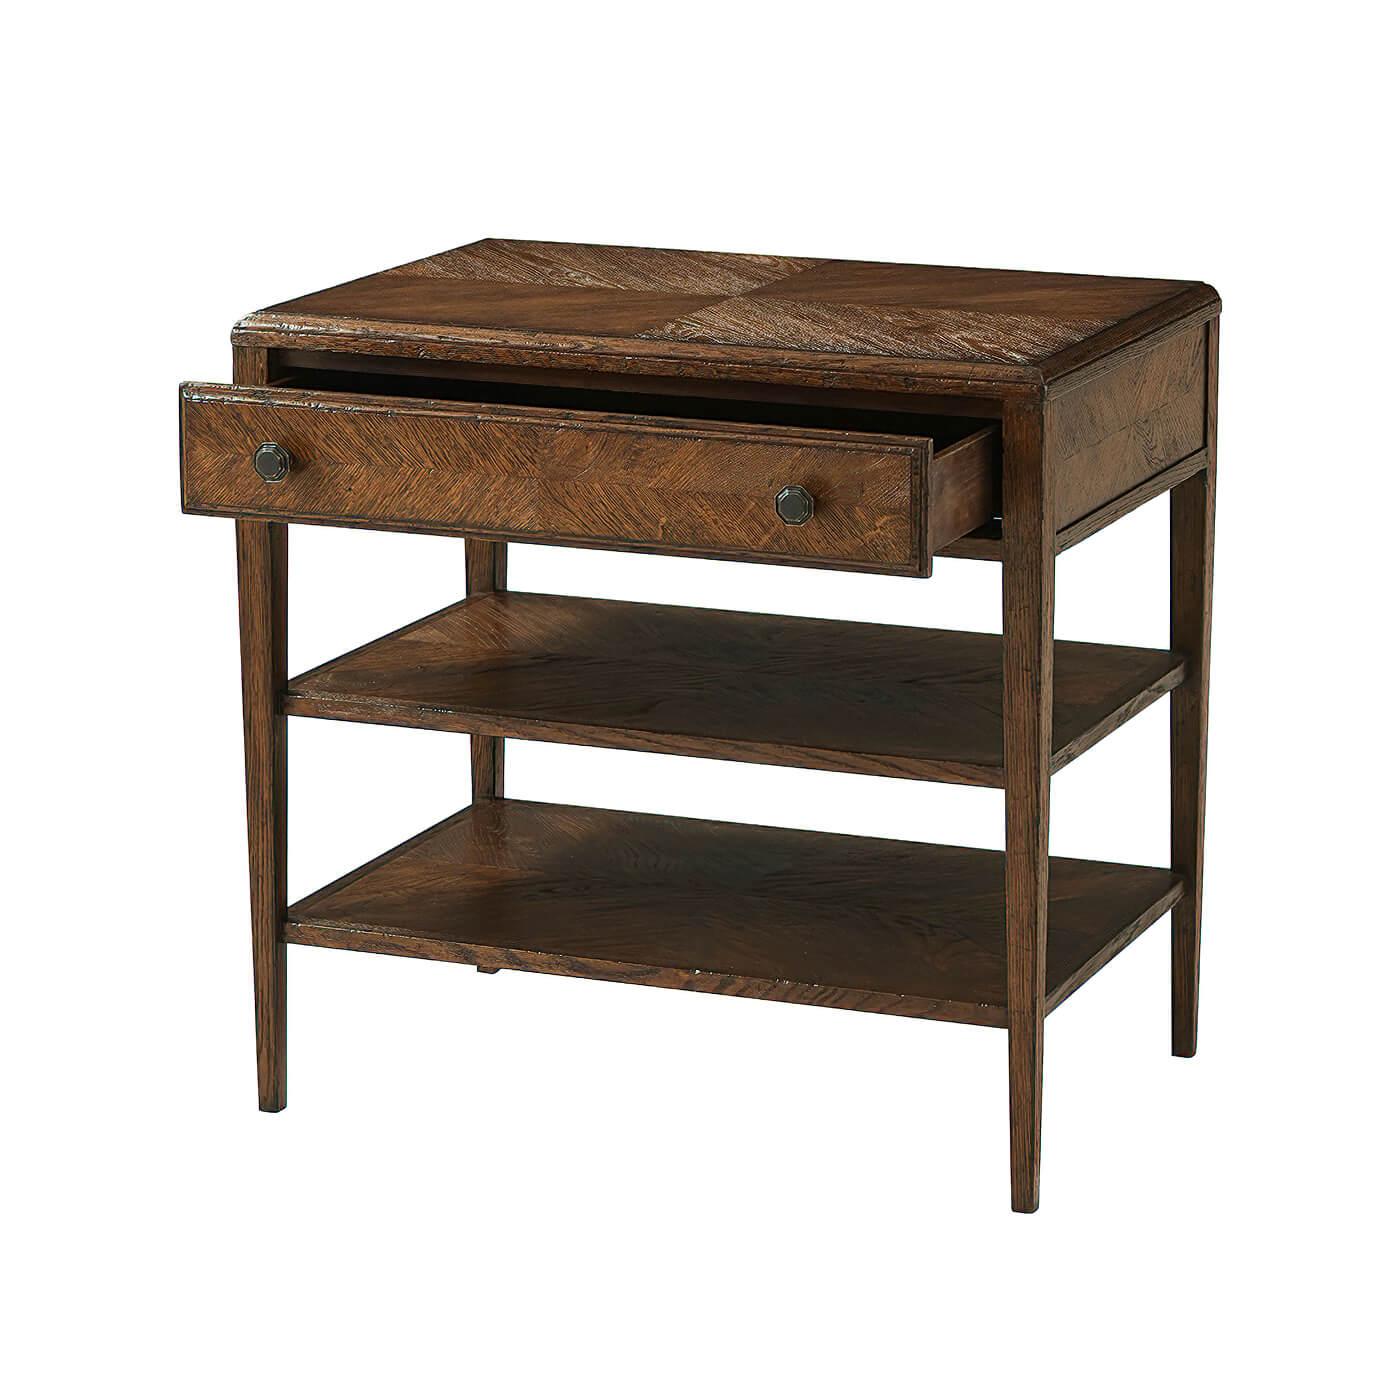 A rustic-style nightstand with an oak parquetry top that is mirrored on the two shelves below. It has one frieze drawer with a mirrored herringbone pattern and Fine Verde Bronze handles.
Shown in dusk finish
Dimensions: 29